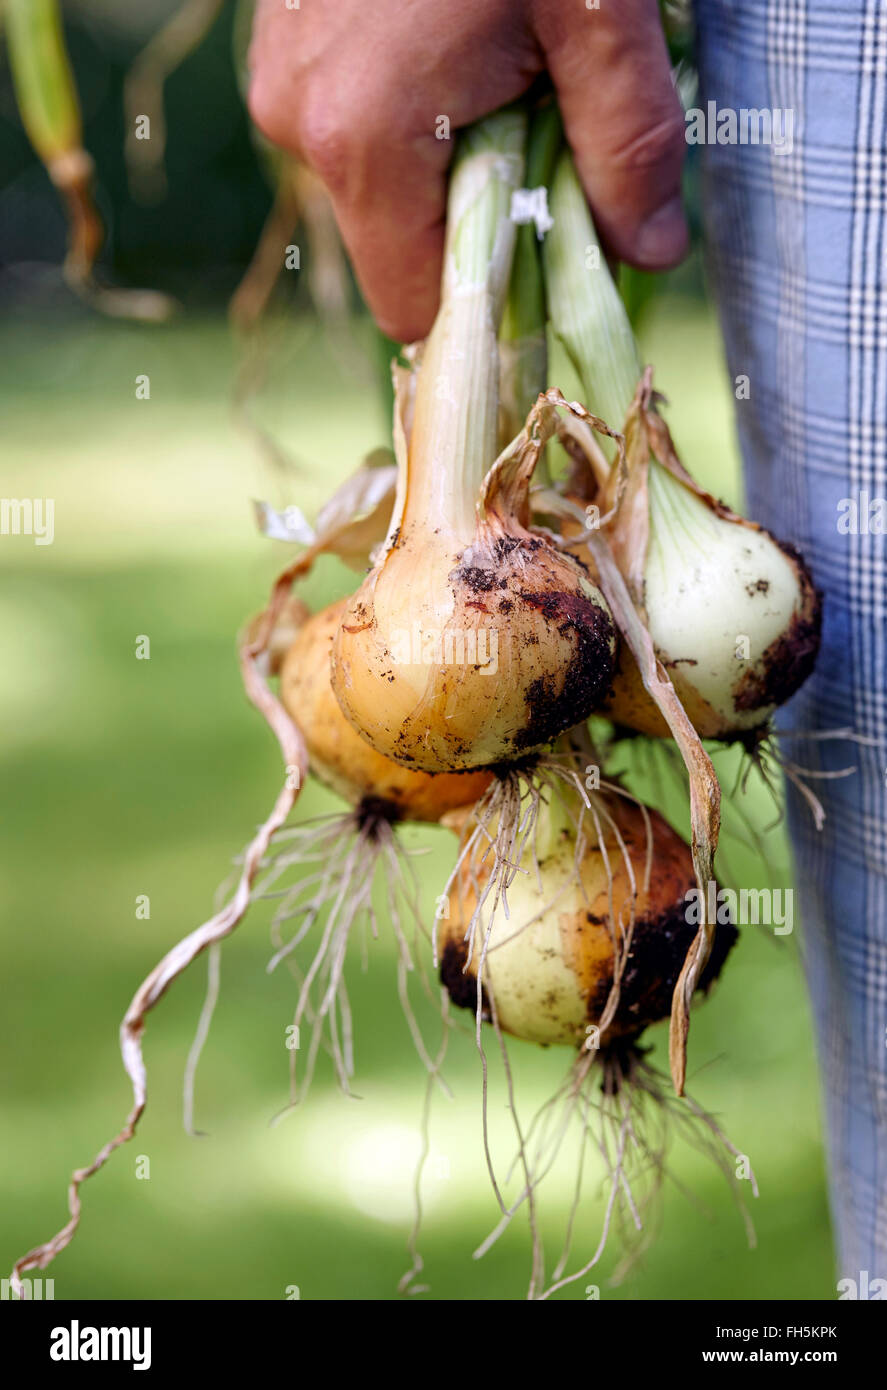 Man Standing Outdoors Holding Young Spanish Onions Freshly dug from the Garden, Toronto, Ontario, Canada Stock Photo